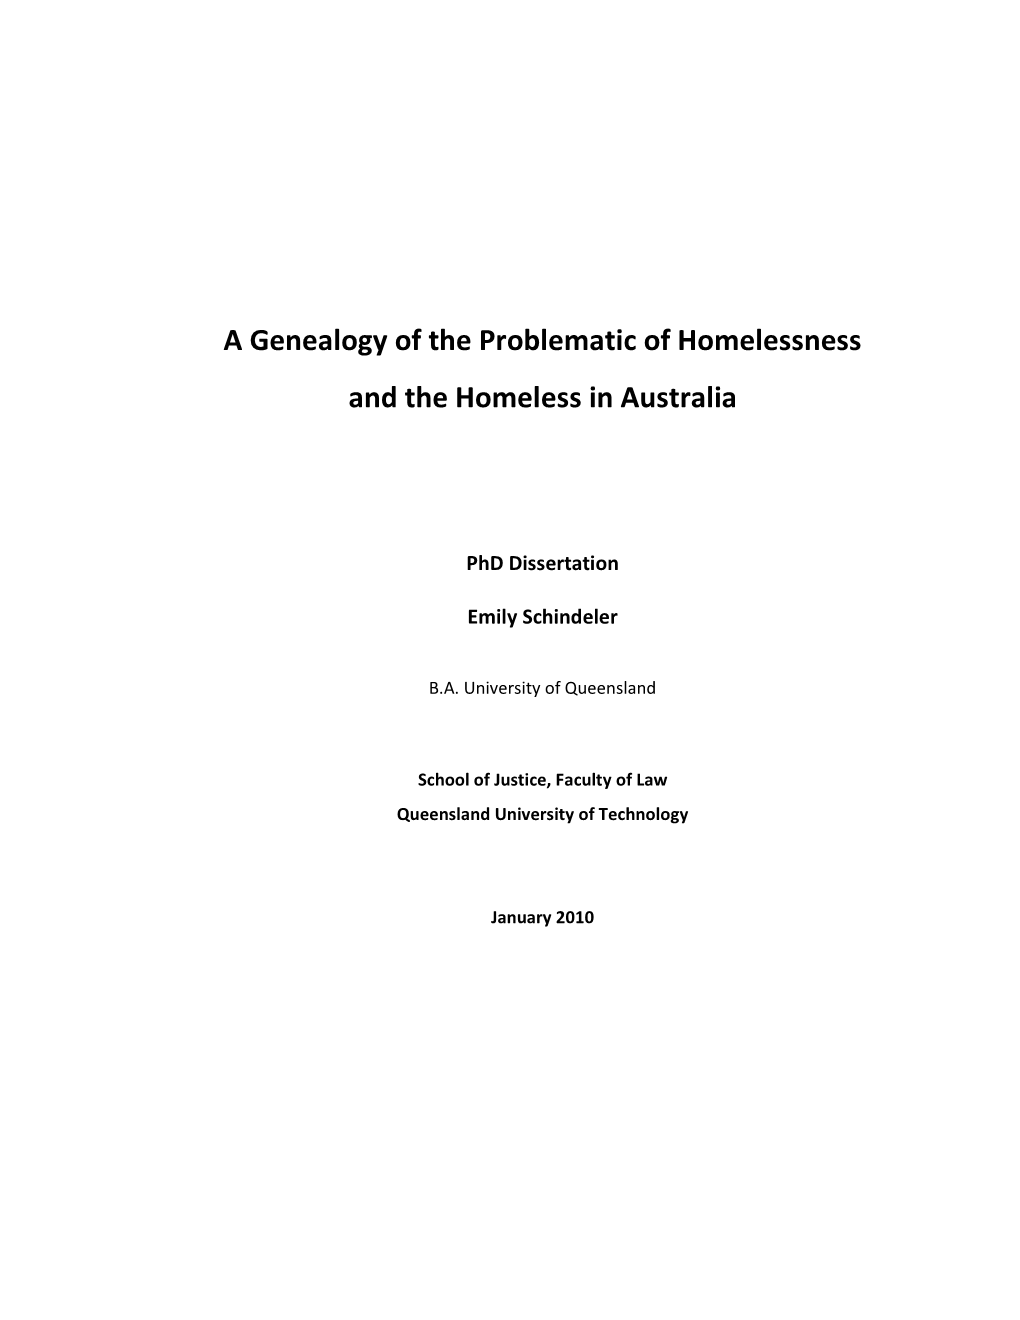 A Genealogy of the Problematic of Homelessness and the Homeless in Australia